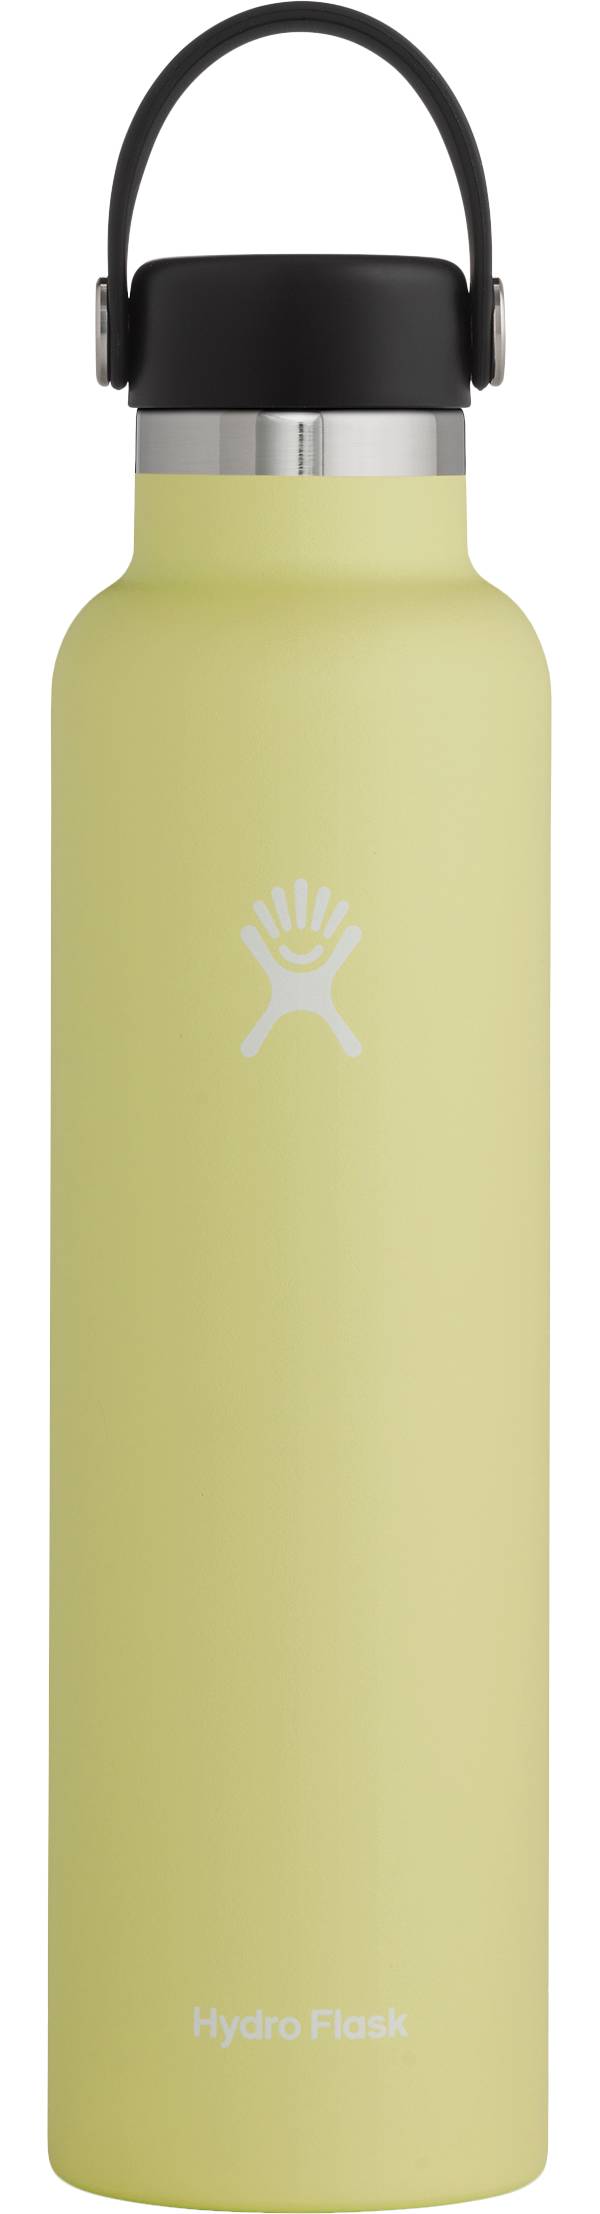 Hydro Flask Standard Mouth 24 oz. Bottle product image